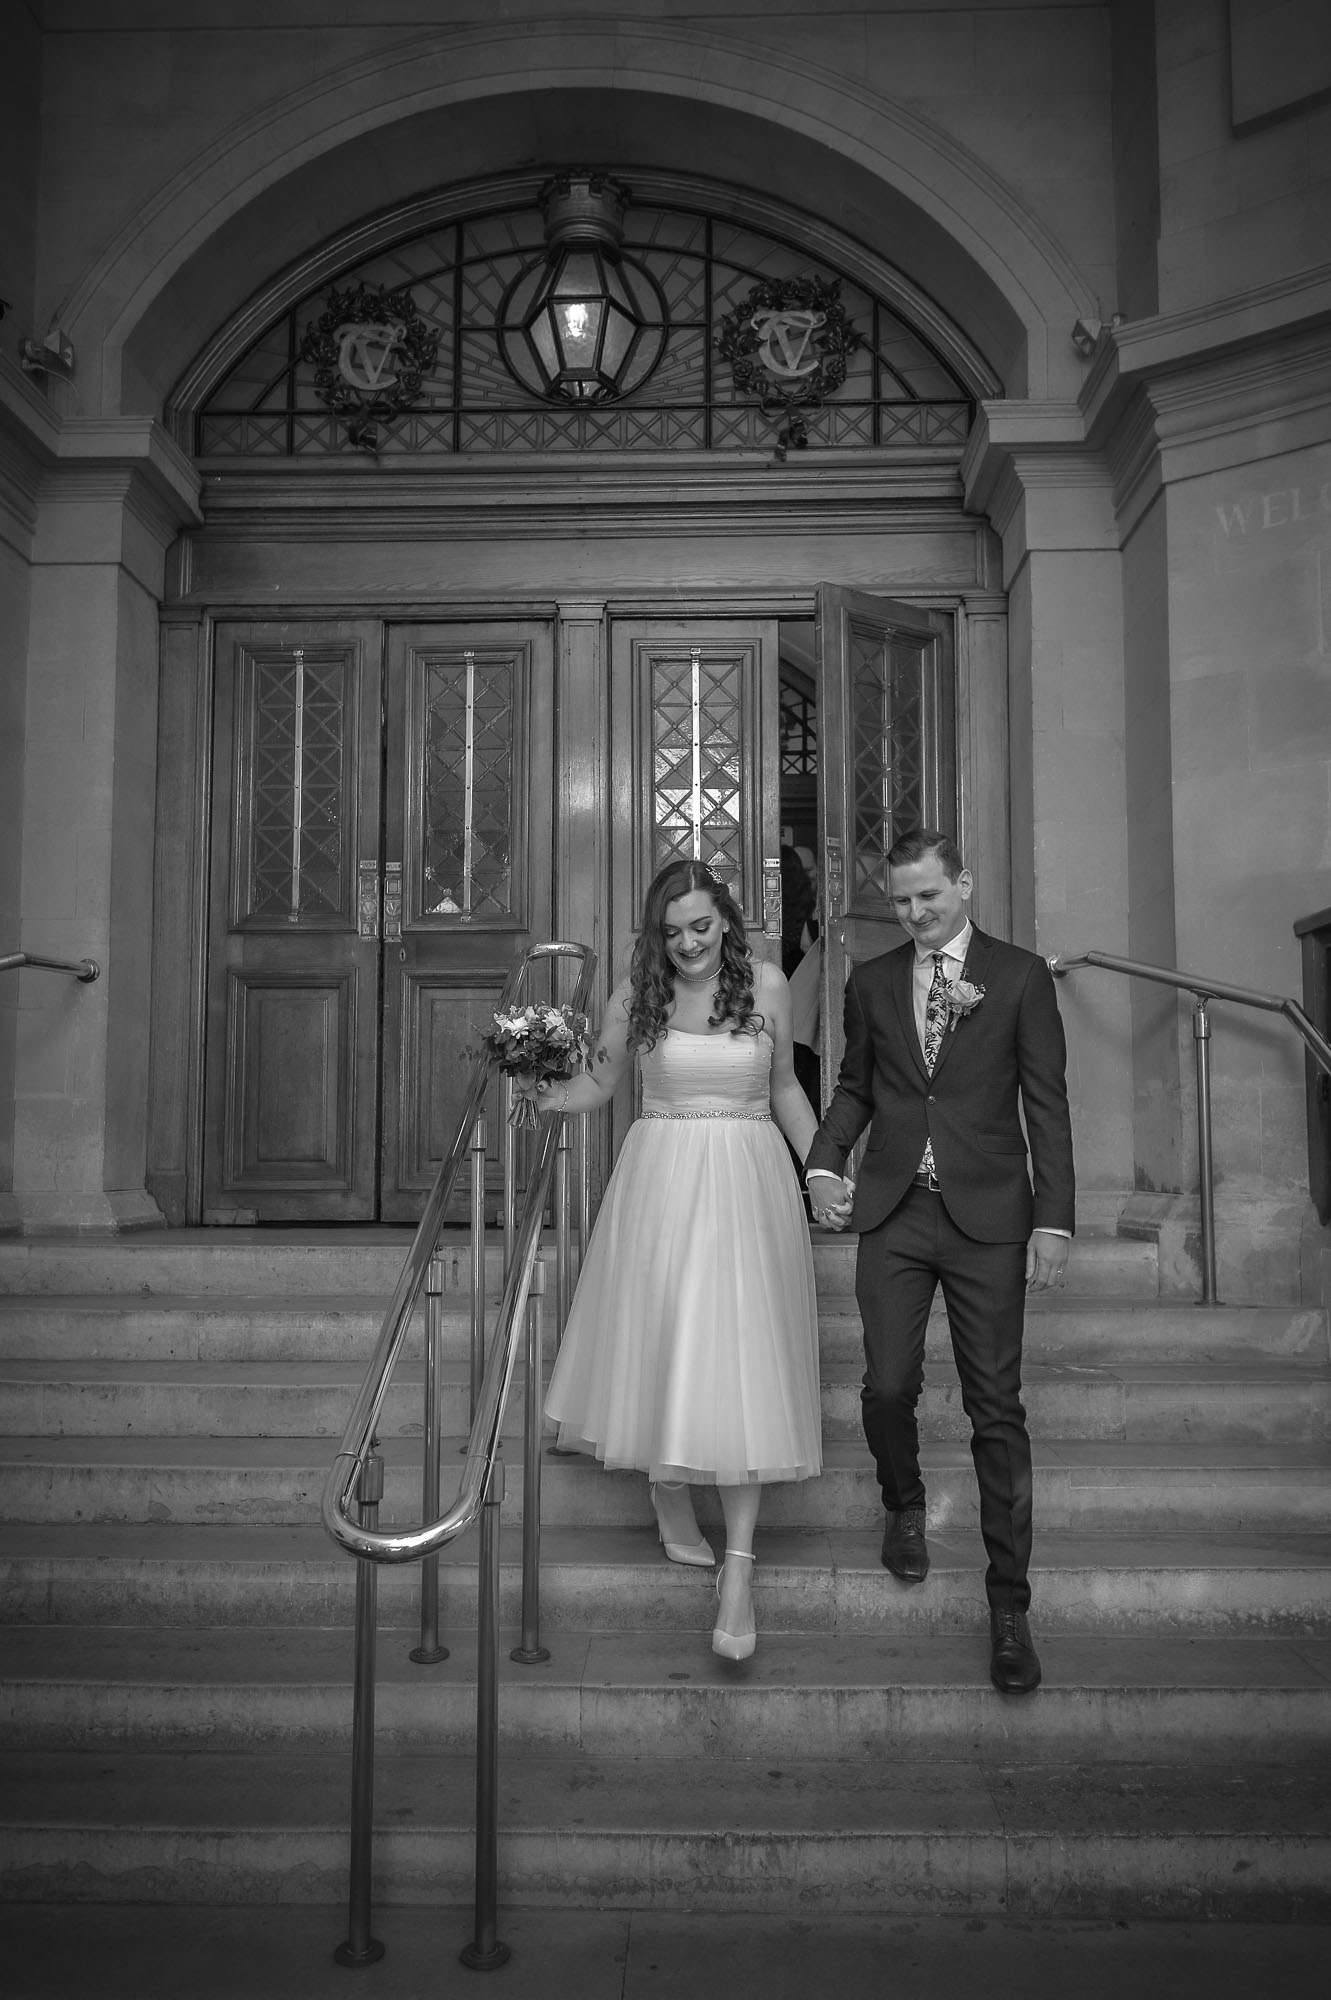 The newly-weds descend the City Hall steps after their wedding in Cardiff